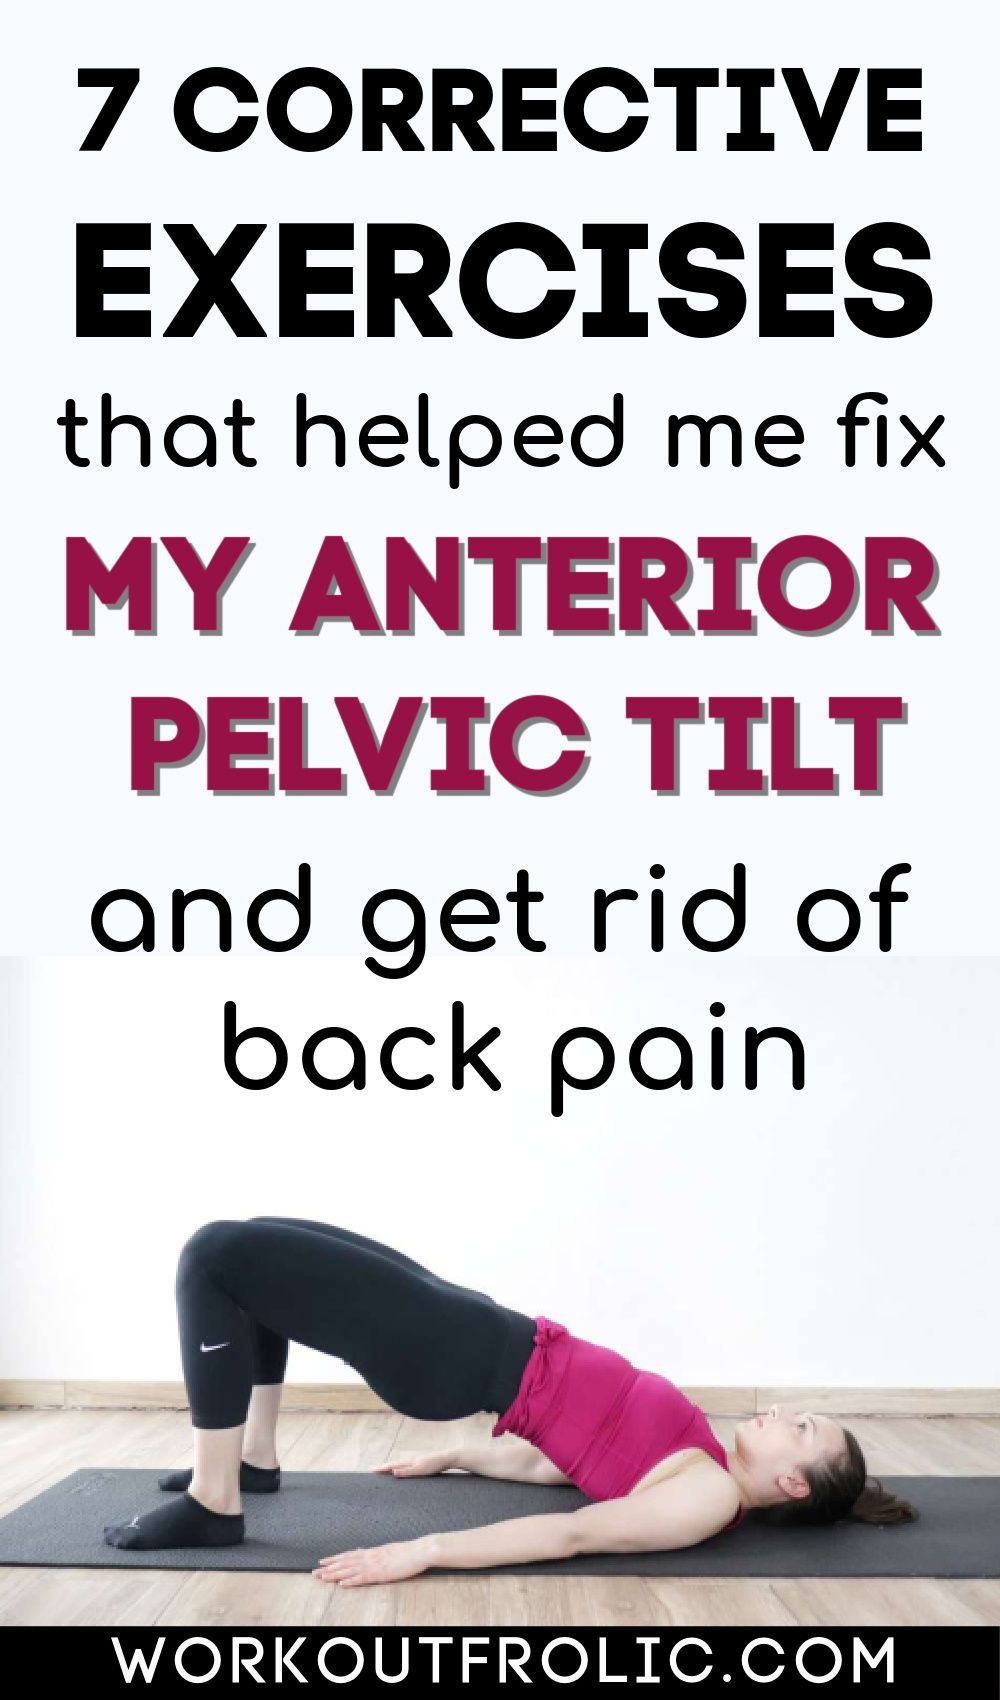 Reduce lower back pain and fix your posture: Corrective exercises to Get rid of Anterior Pelvic Tilt